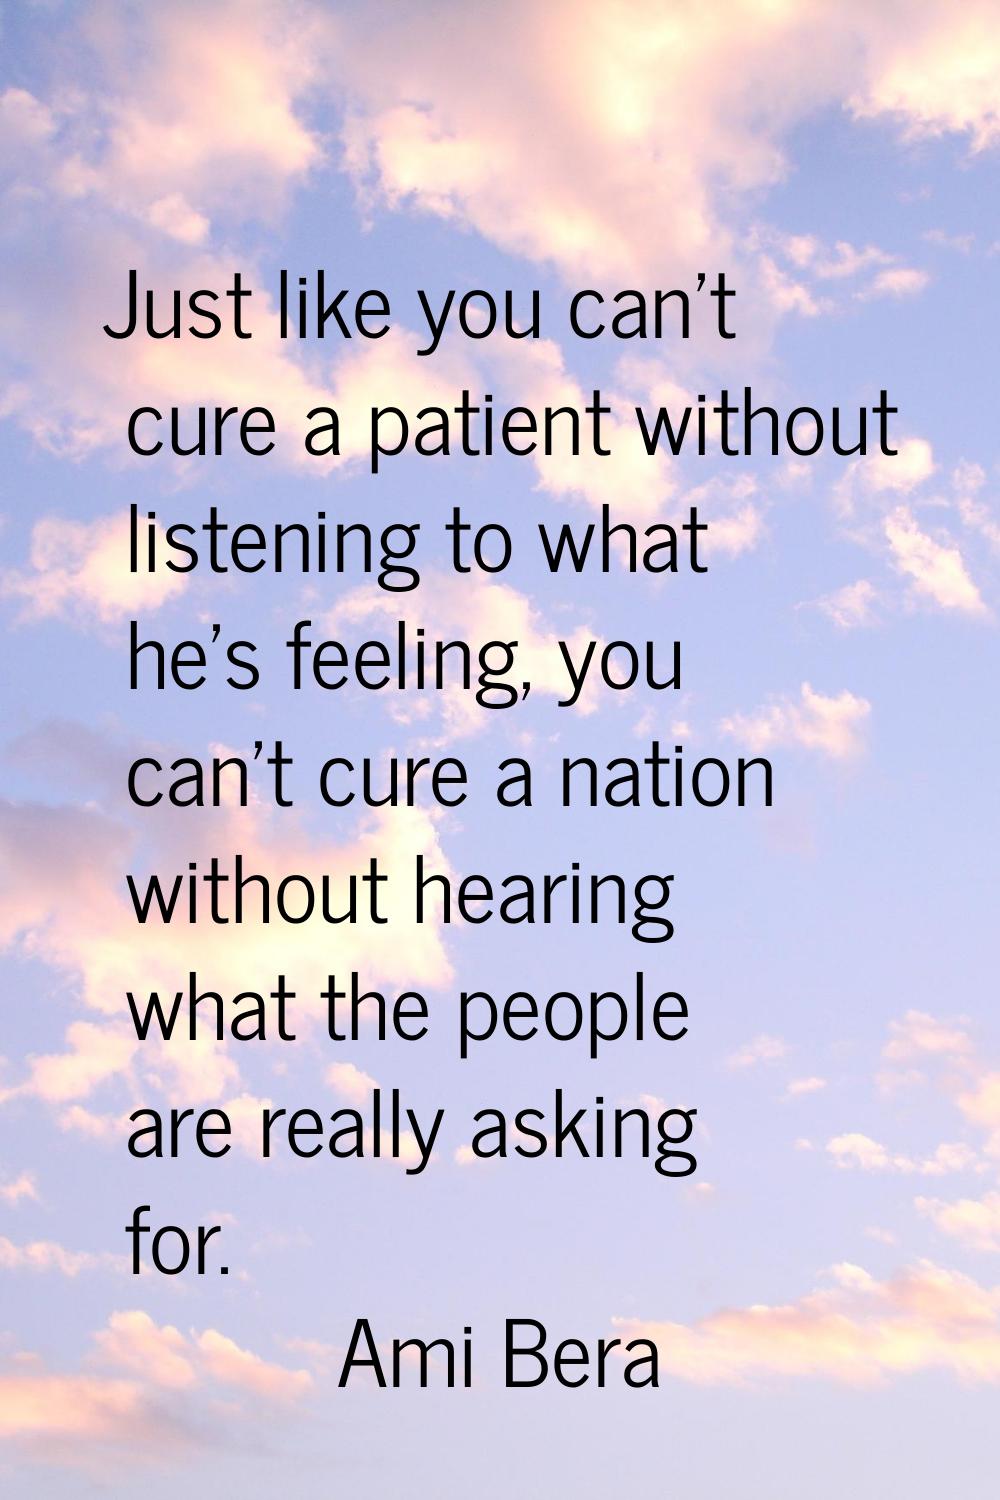 Just like you can't cure a patient without listening to what he's feeling, you can't cure a nation 